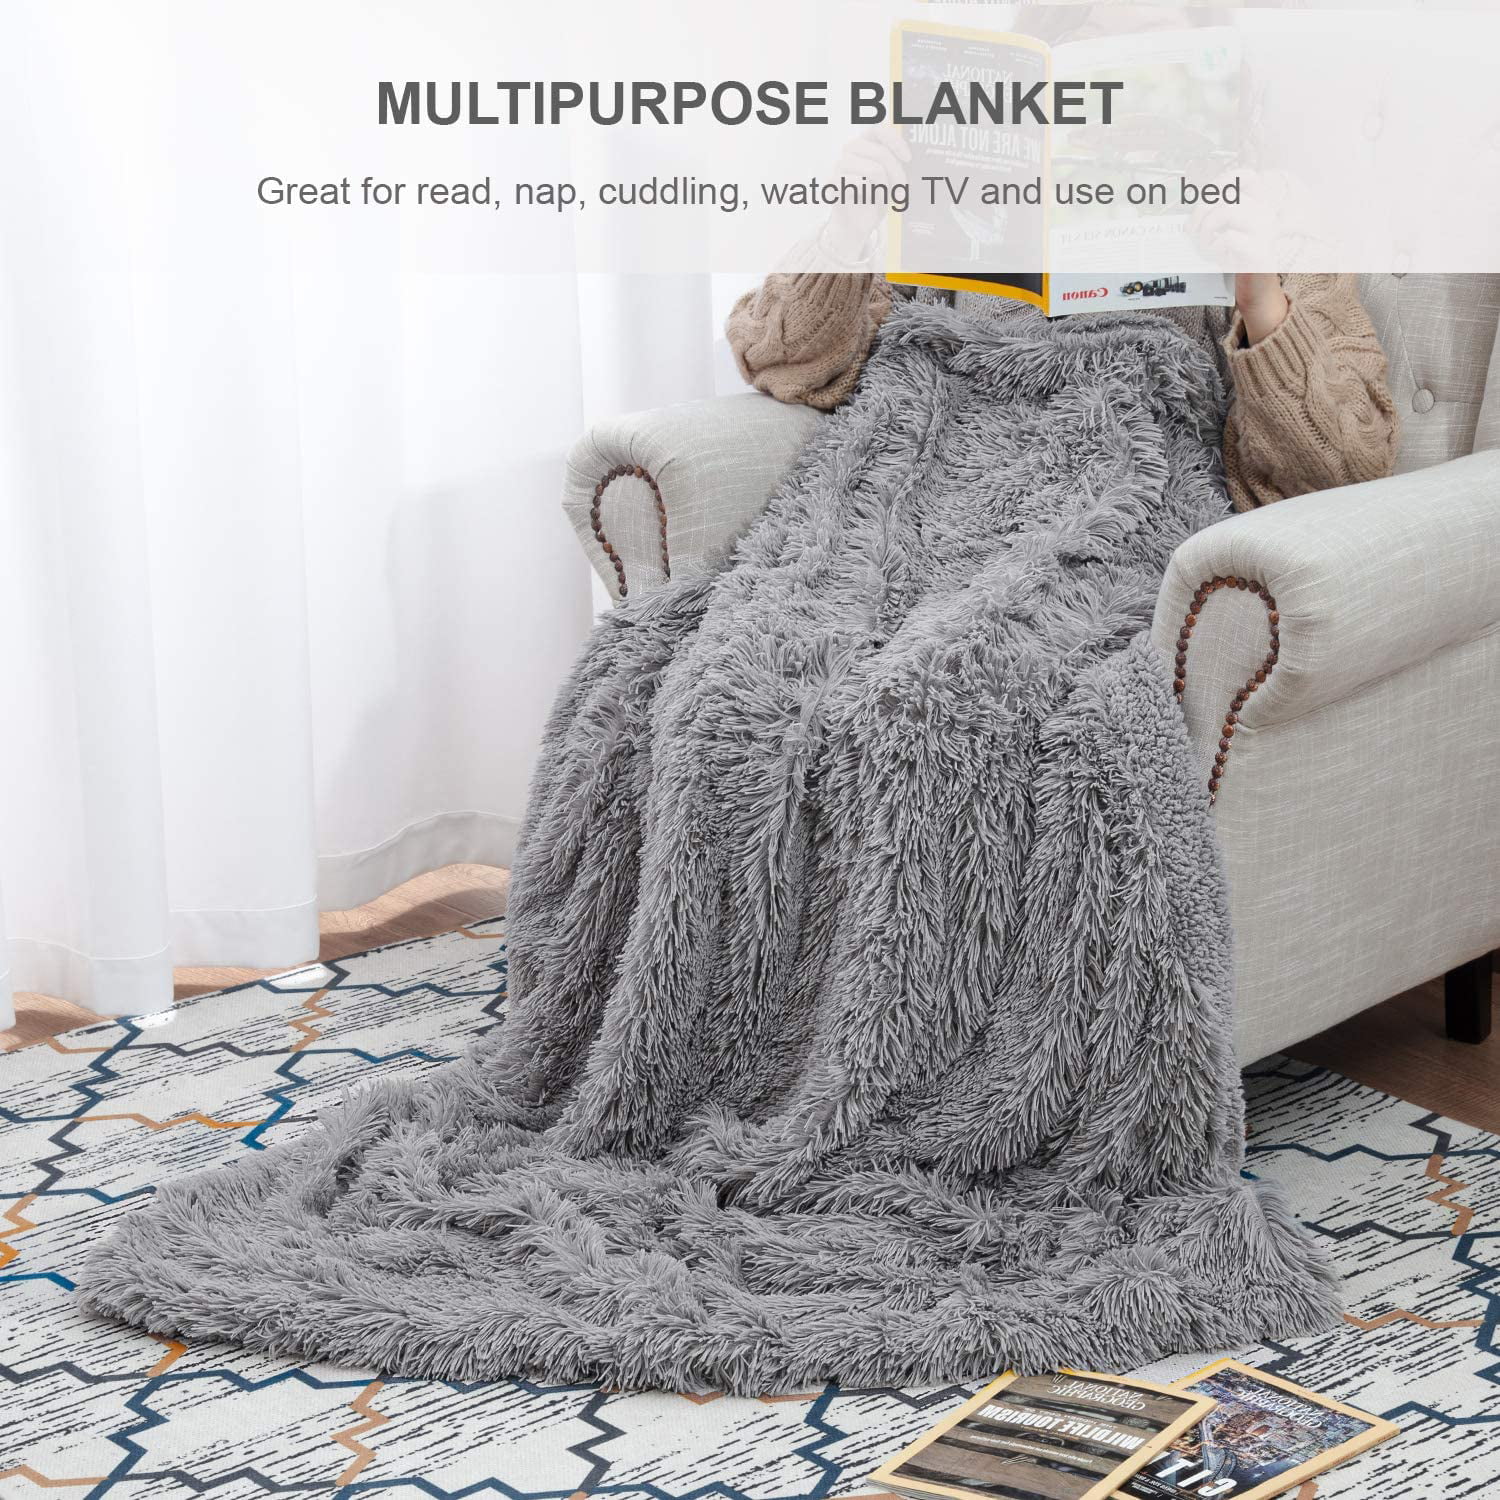  Fuzzy Faux Fur Throw Blanket Extra Soft Double-Layer  Lightweight Shaggy Blanket Fluffy Cozy Plush Comfy Fleece Blankets for  Couch Sofa Bedroom 47X31in : Home & Kitchen